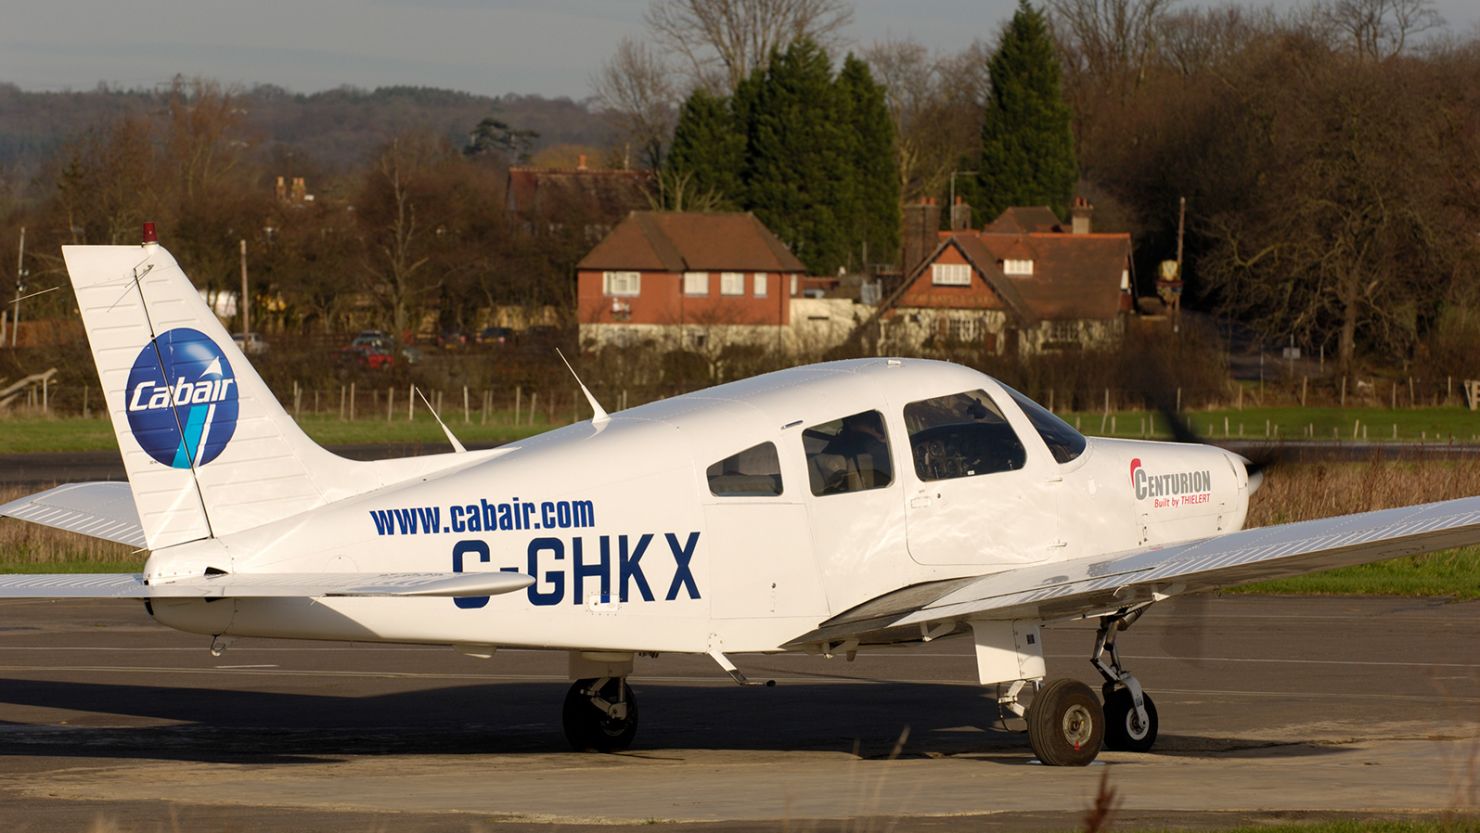 A Piper PA-28-161 airplane similar to the one involved in the incident at Blackpool.